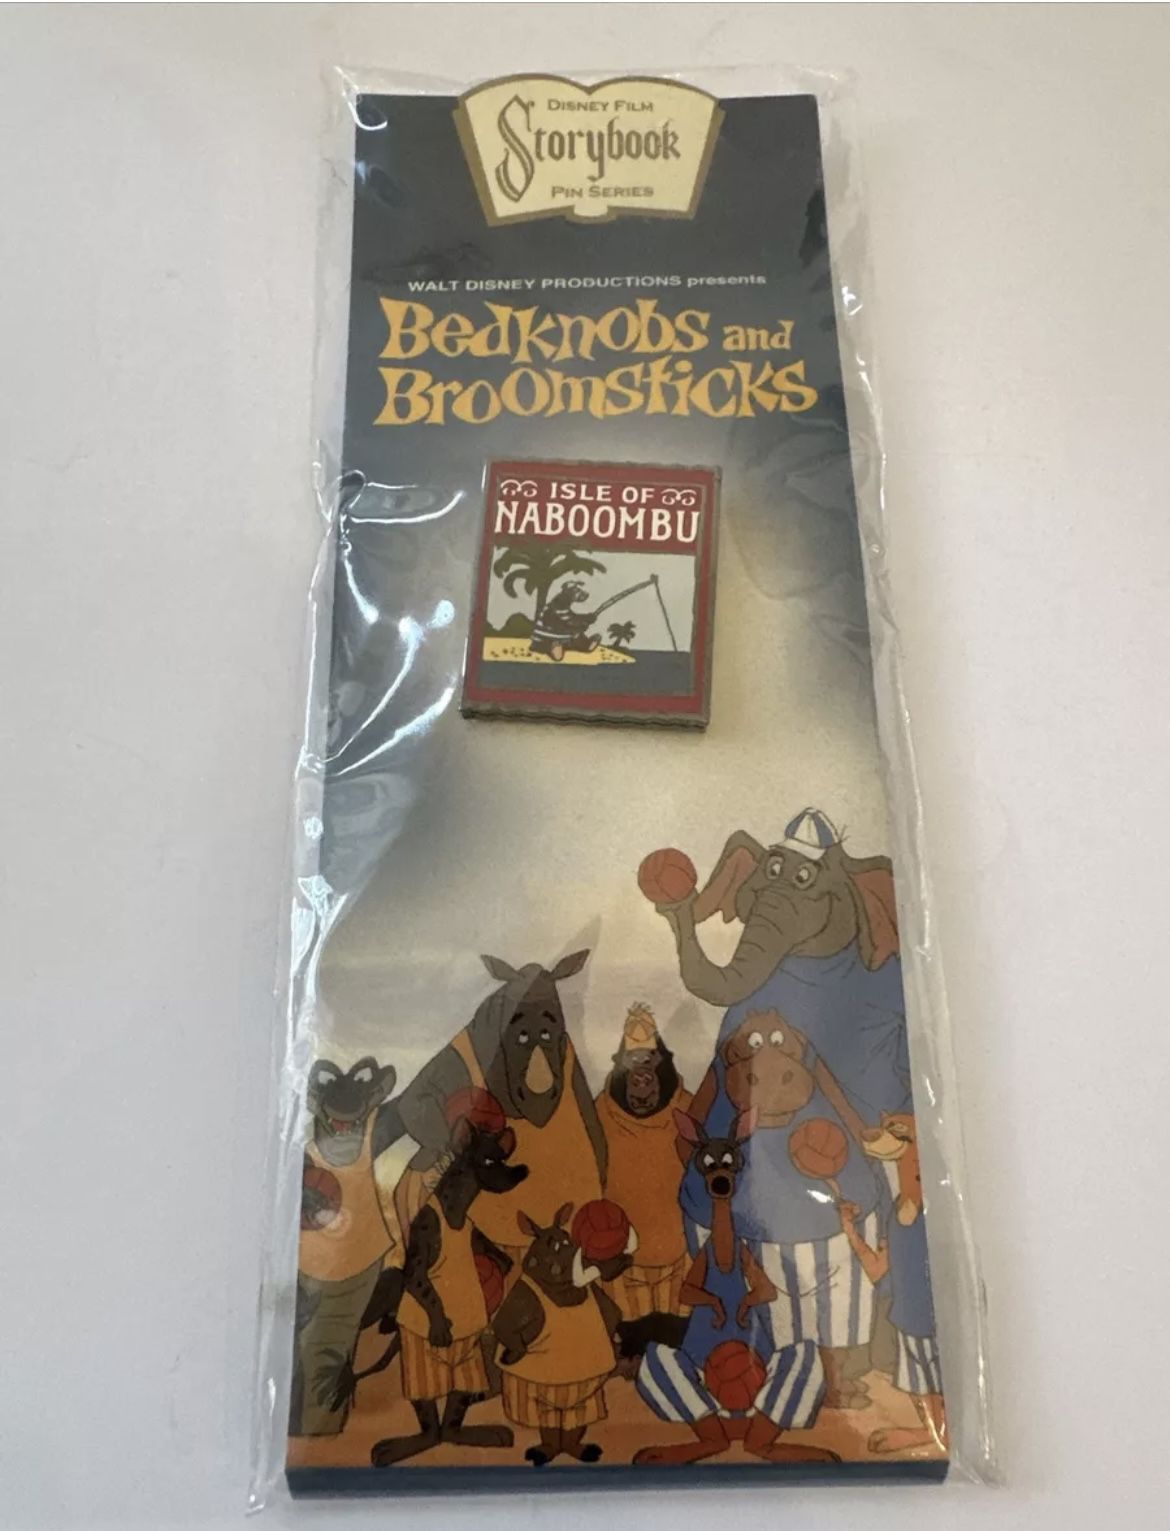 Disney Collector Pin Storybook Series Bedknobs and Broomsticks *SEALED* 2002